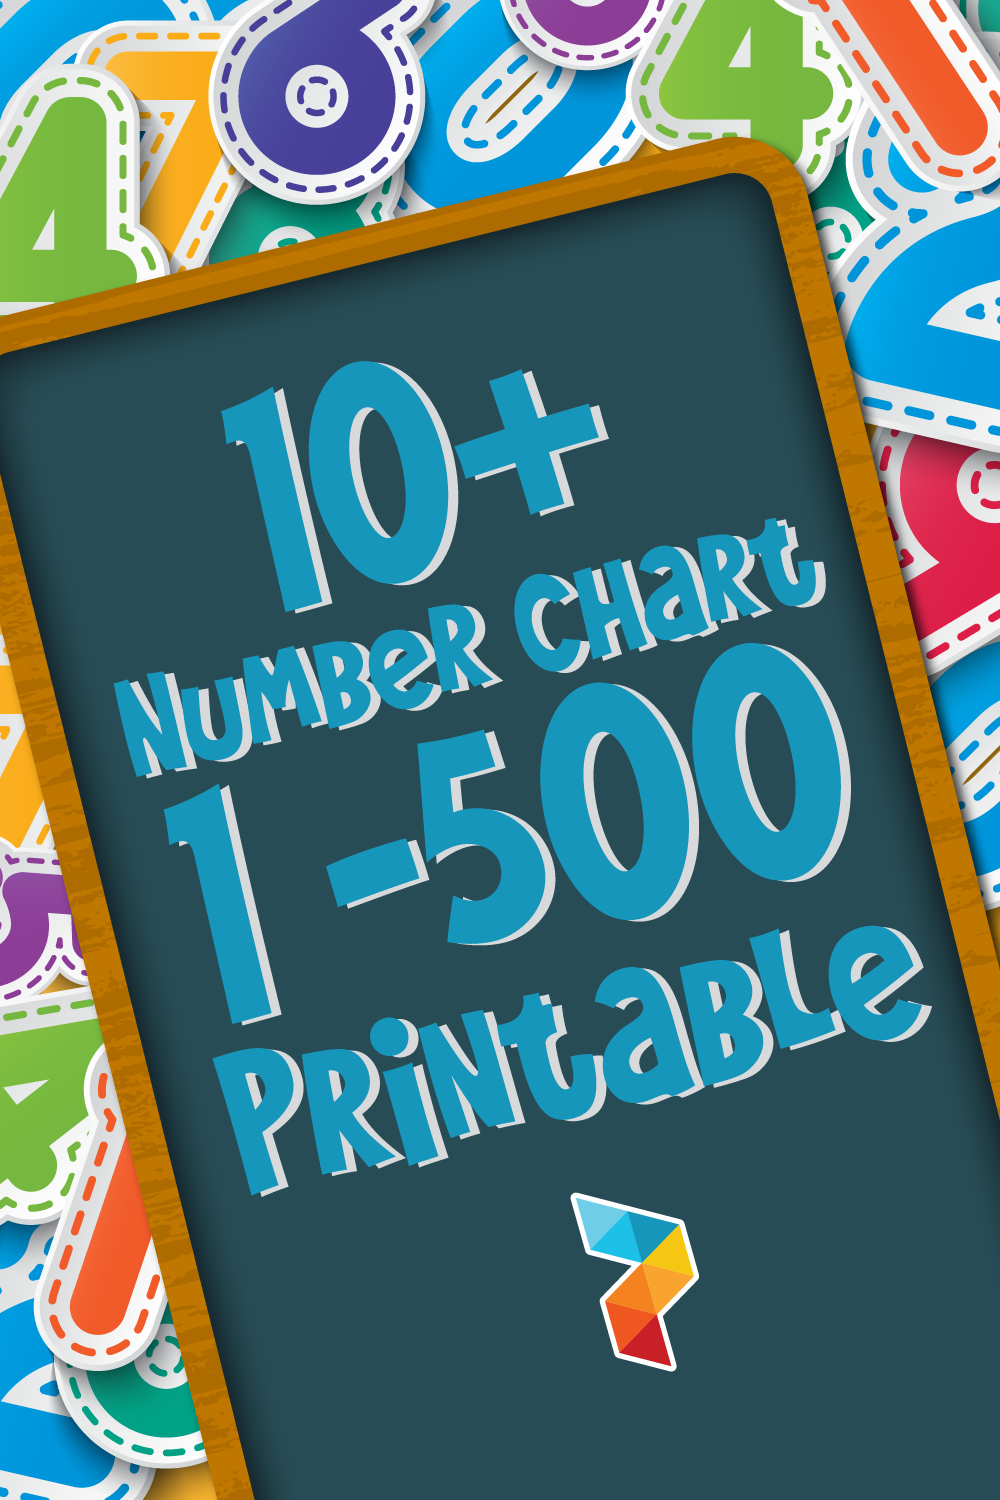 Number Chart 1 -500